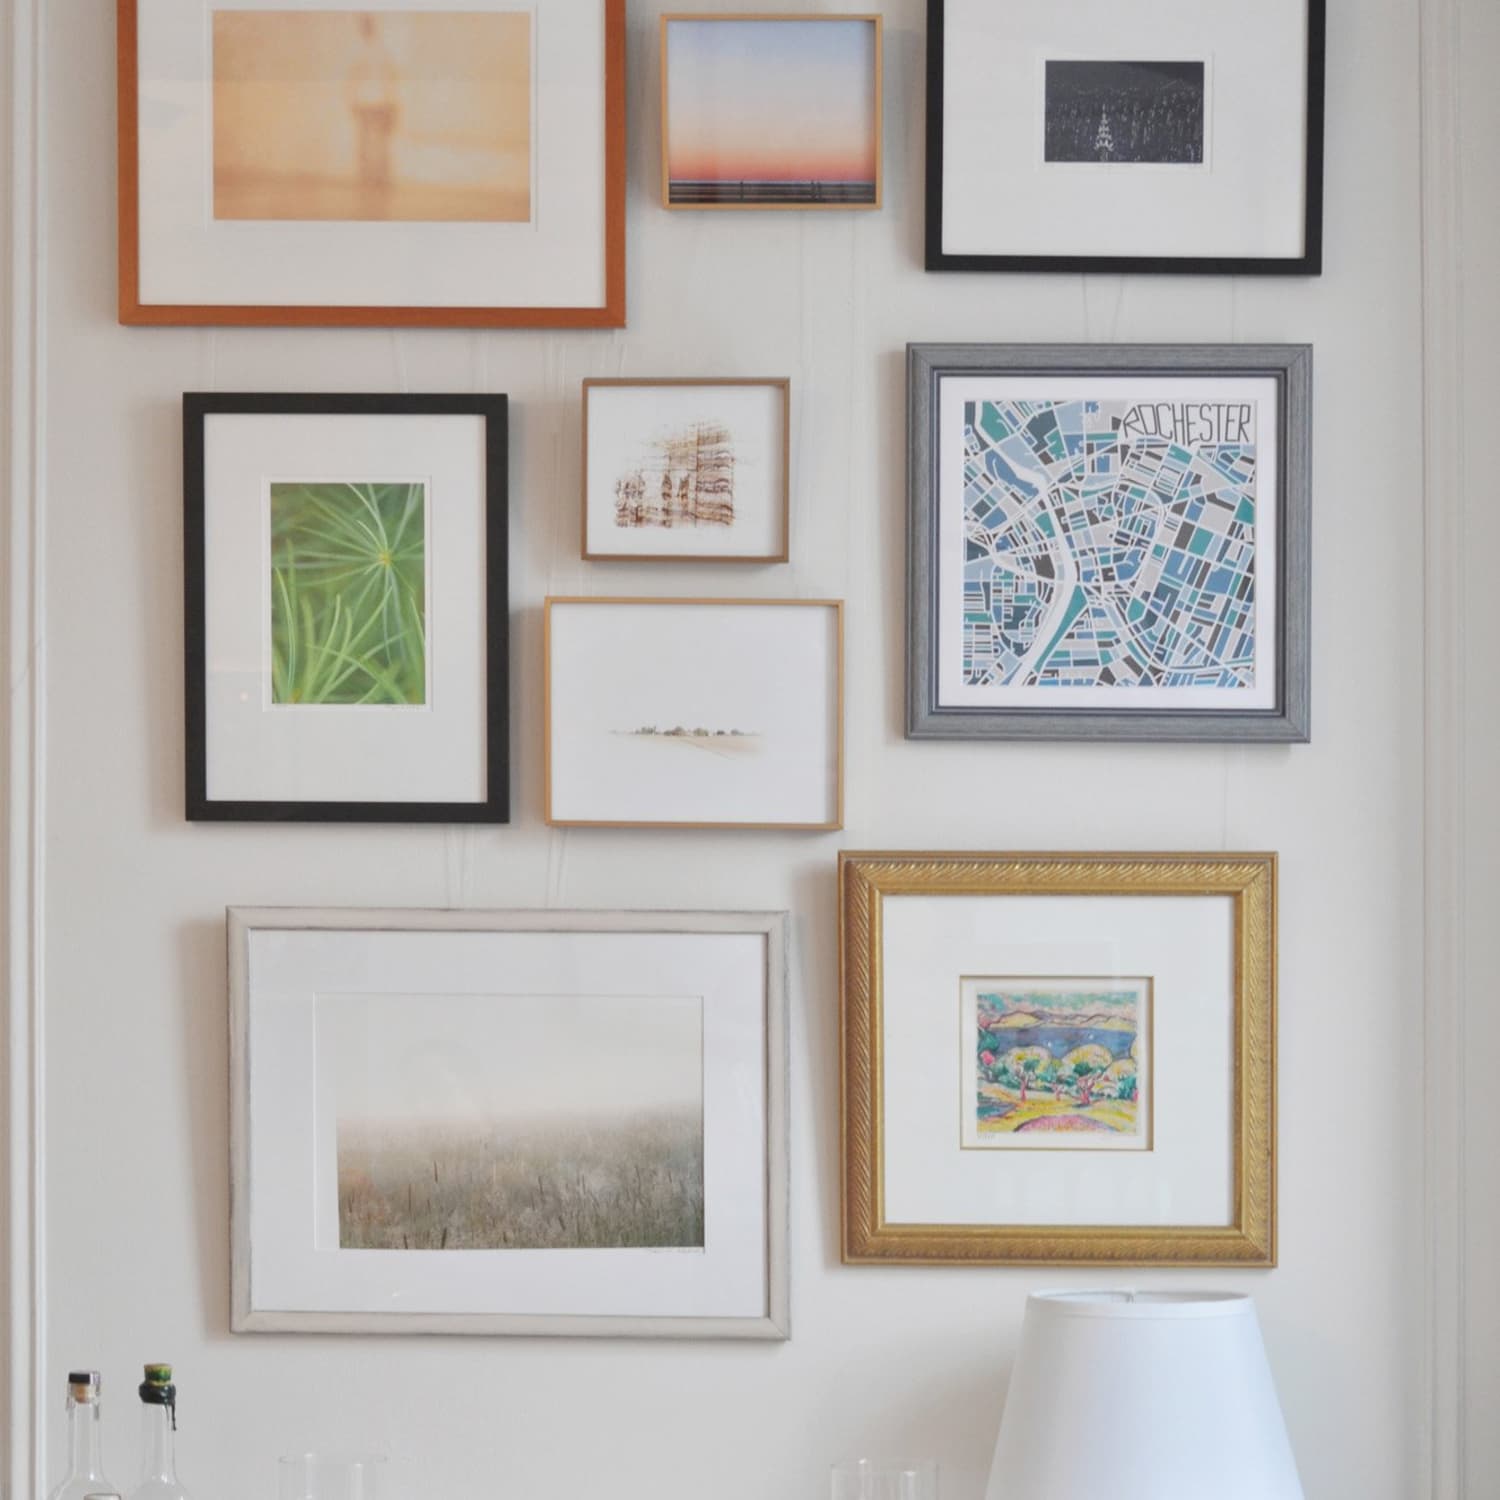 How to Frame Your Art on a Budget (Step-by-Step DIY Guide